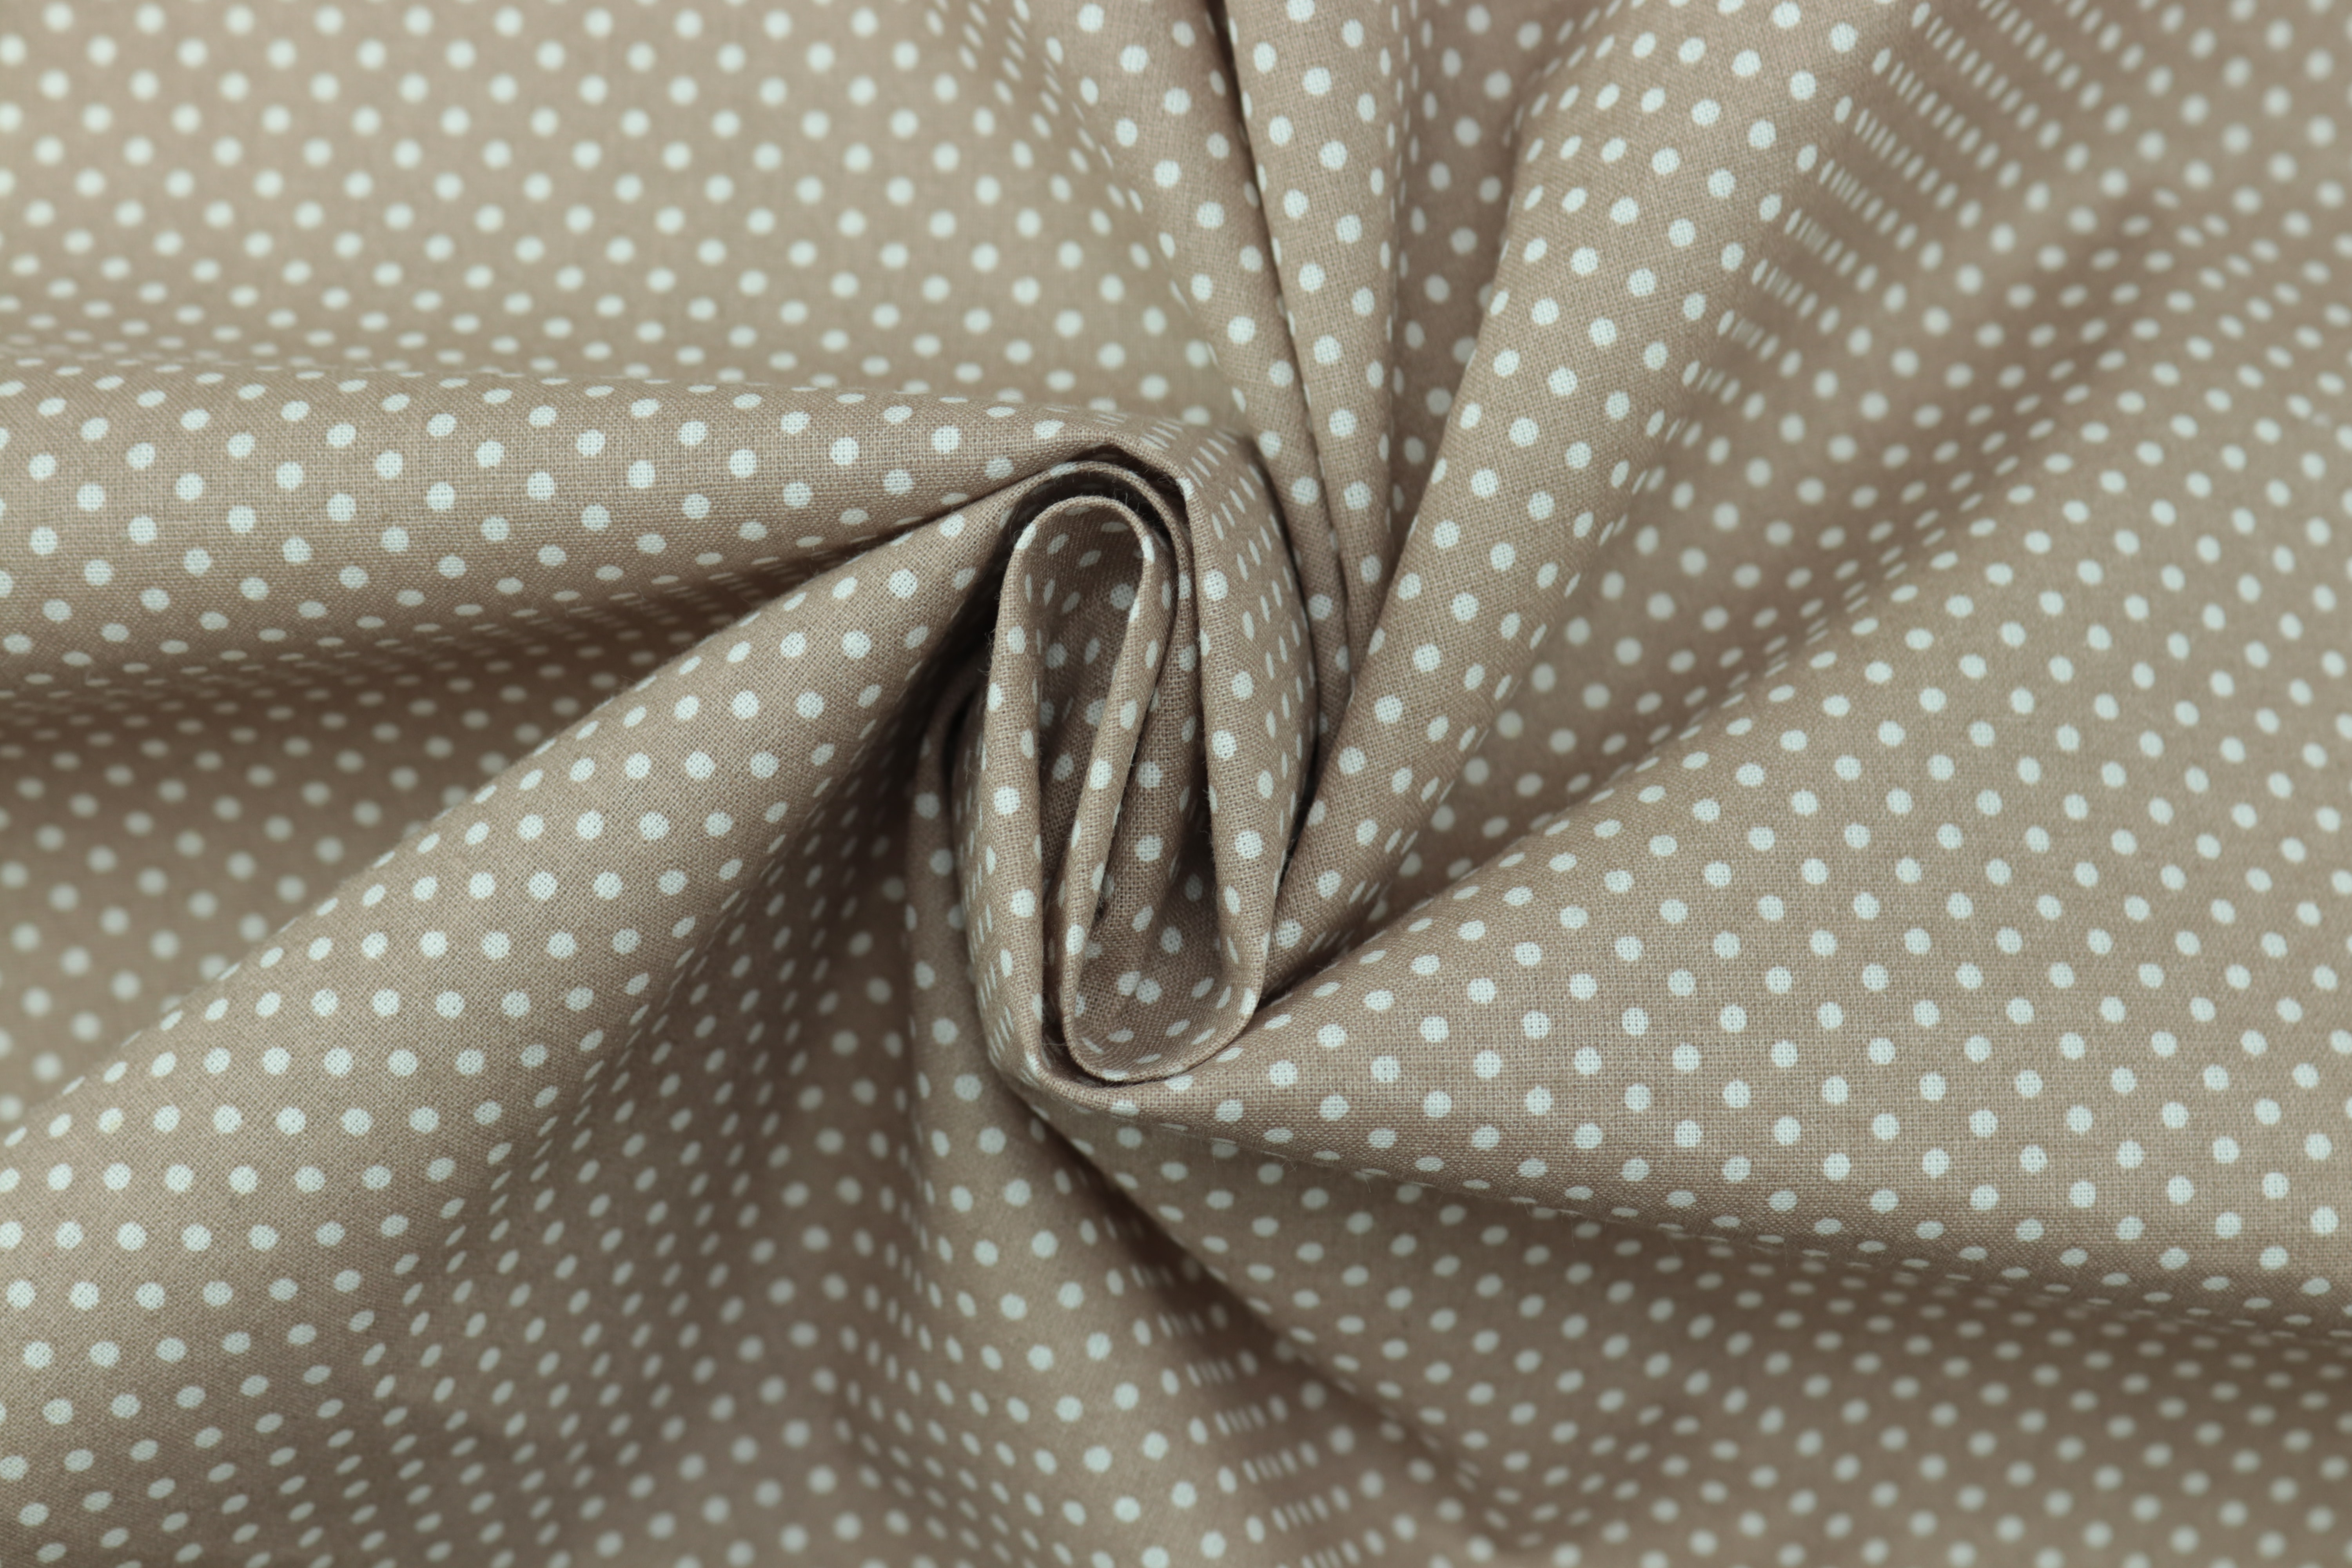 pattern, texture, textures, cloth, points, point, folds, pleating, peas, polka dots UHD